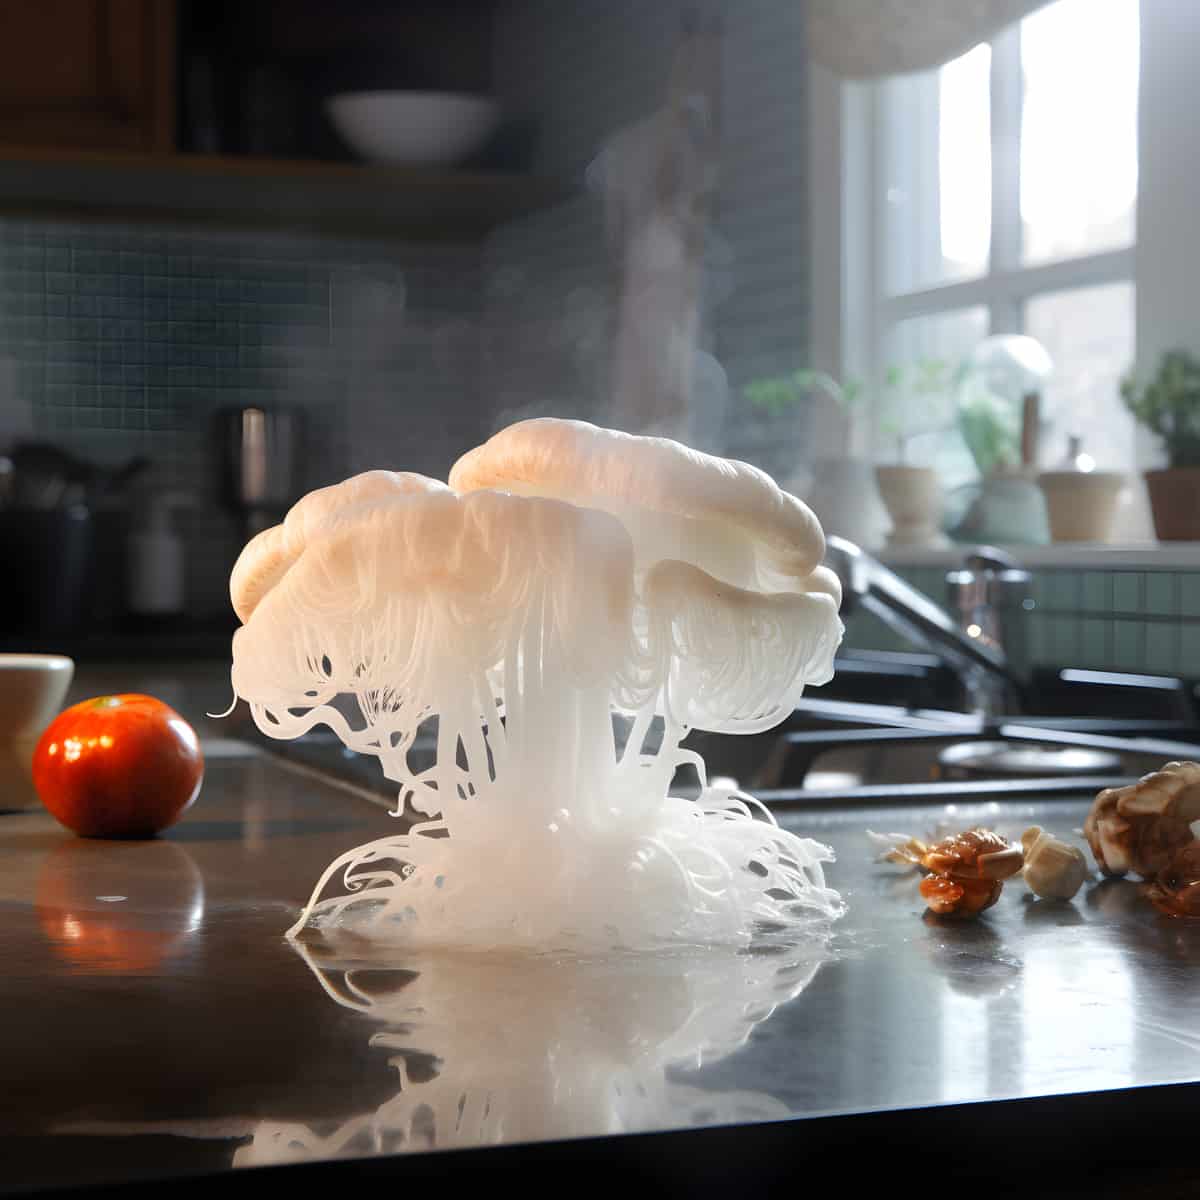 White Jelly Mushrooms on a kitchen counter